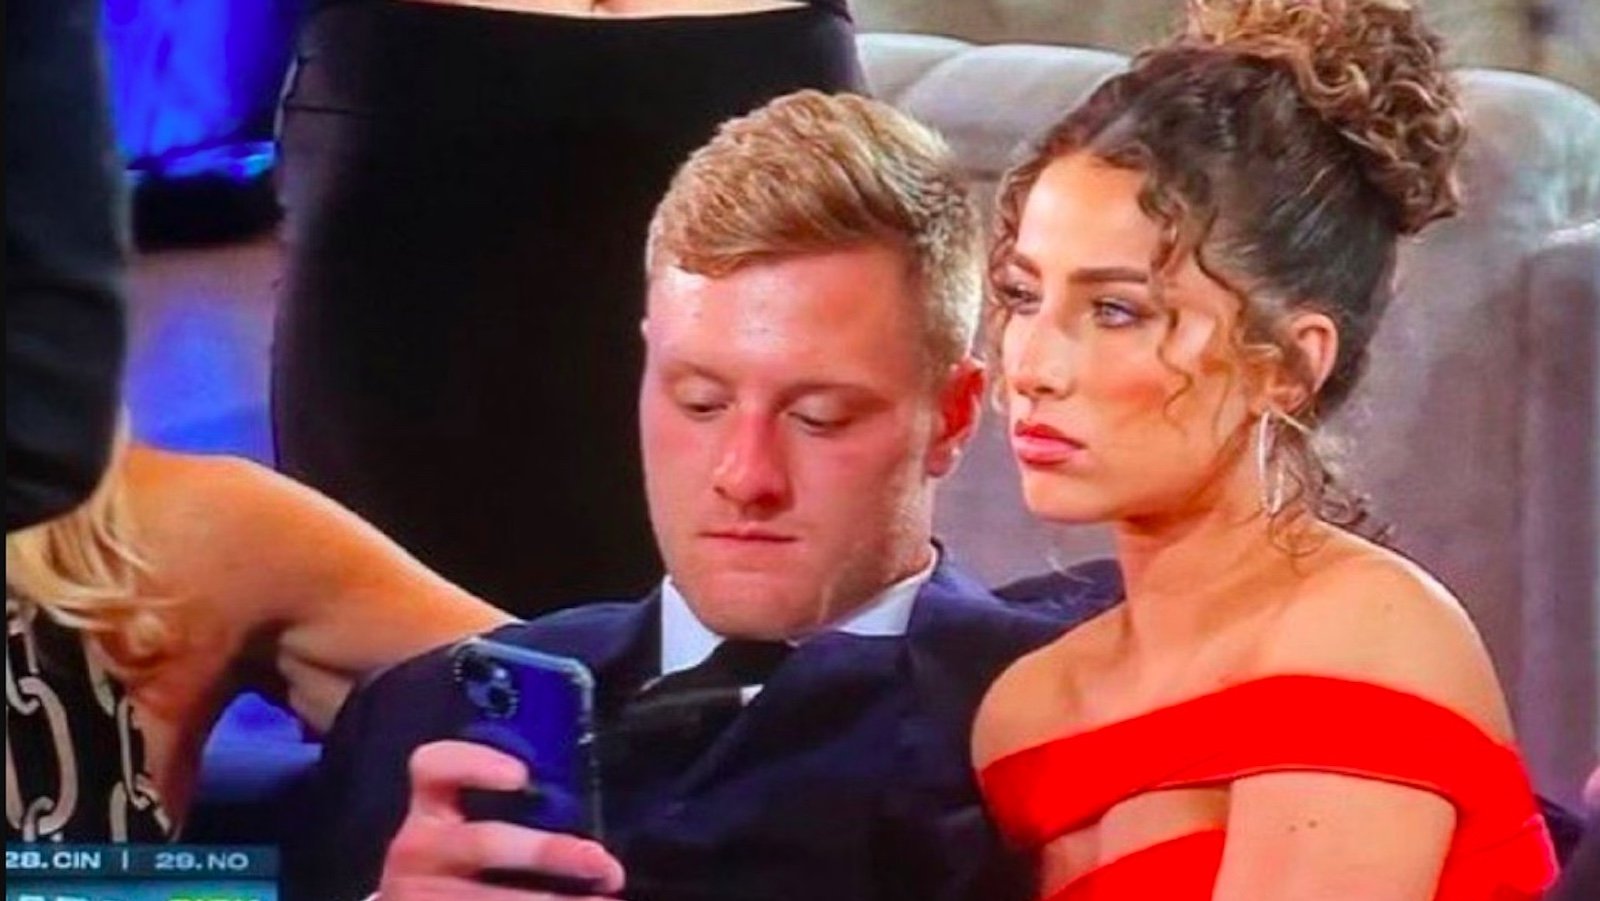 Will Levis And His Viral GF Who Looked Miserable As He Fell In The Draft Have Broken Up